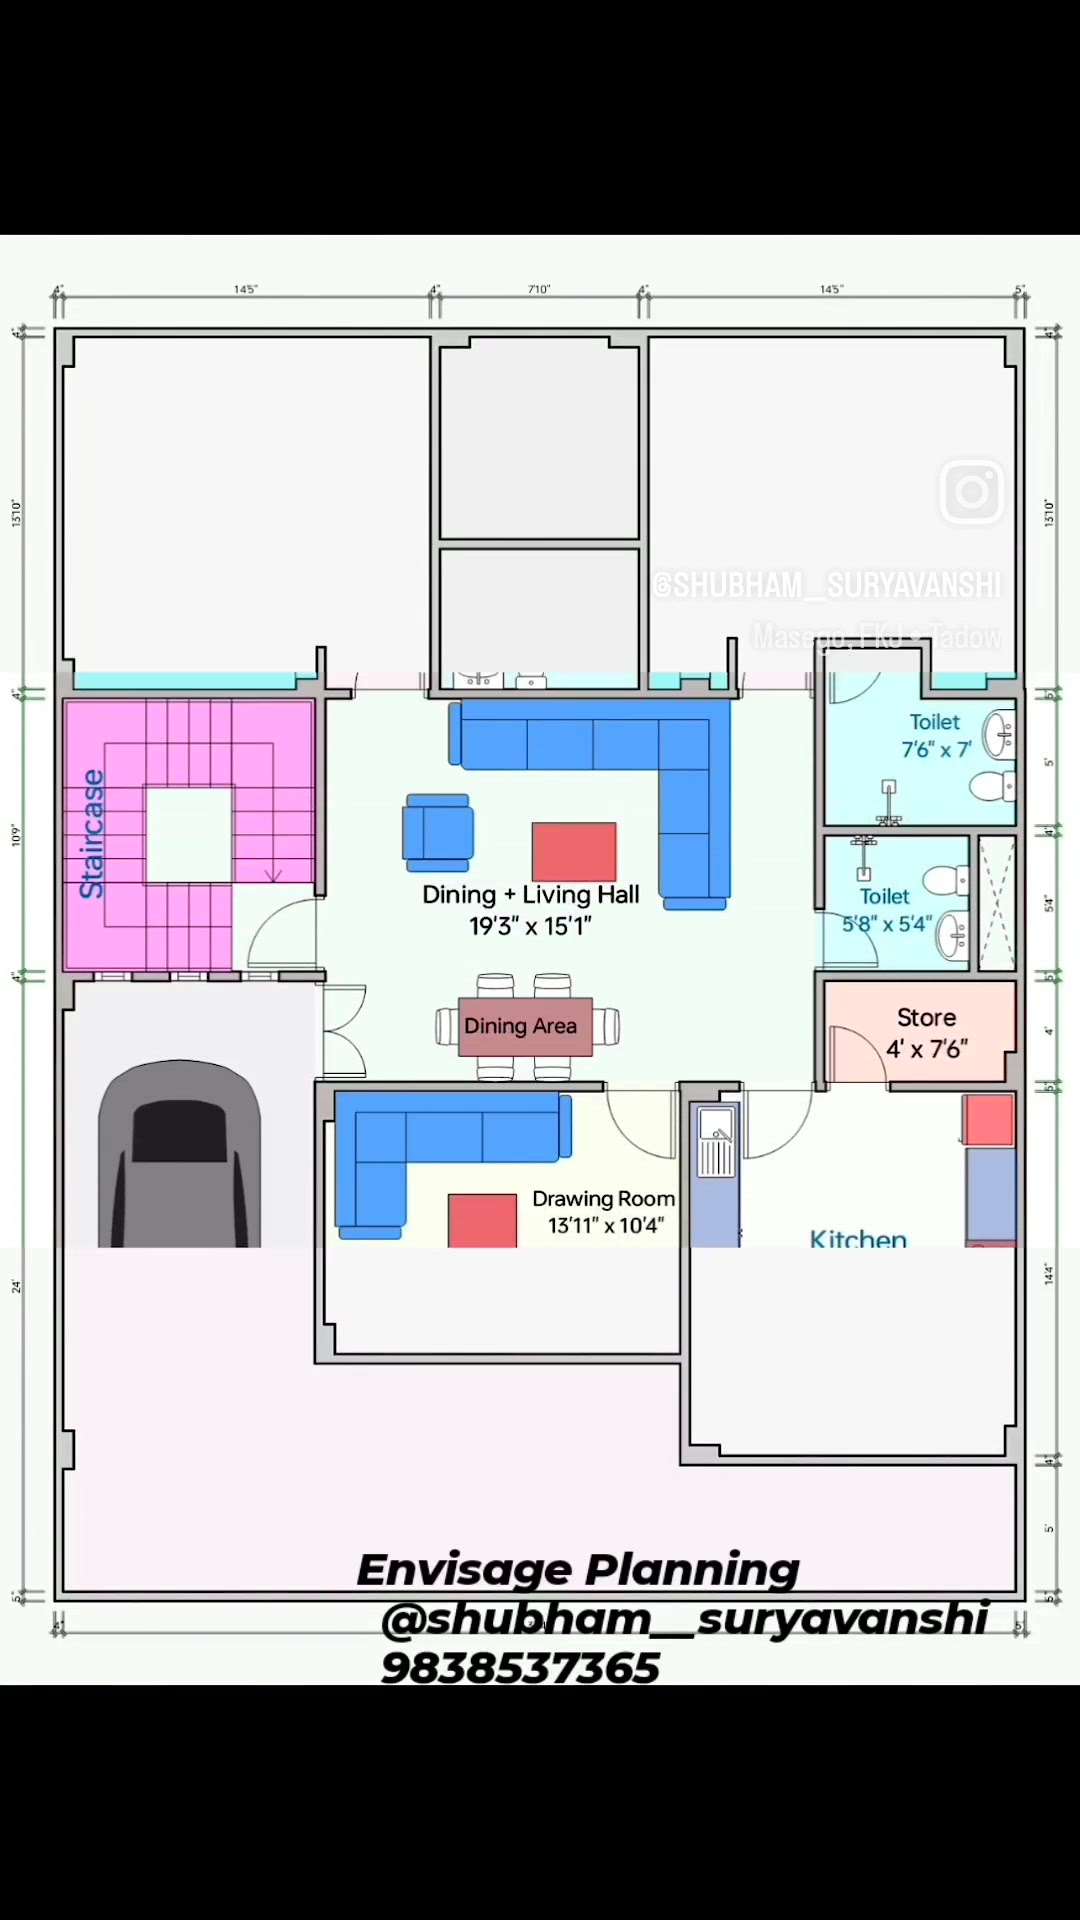 We provide
✔️ Floor Planning,
✔️ Construction
✔️ Vastu consultation
✔️ site visit, 
✔️ Structural Designs
✔️ Steel Details,
✔️ 3D Elevation
✔️ Construction Agreement
and further more

#civil #civilengineering #engineering #plan #planning #houseplans #nature #house #elevation #blueprint #staircase #roomdecor #design #housedesign #skyscrapper #civilconstruction #houseproject #construction #dreamhouse #dreamhome #architecture #architecturephotography #architecturedesign #autocad #staadpro #staad #bathroom